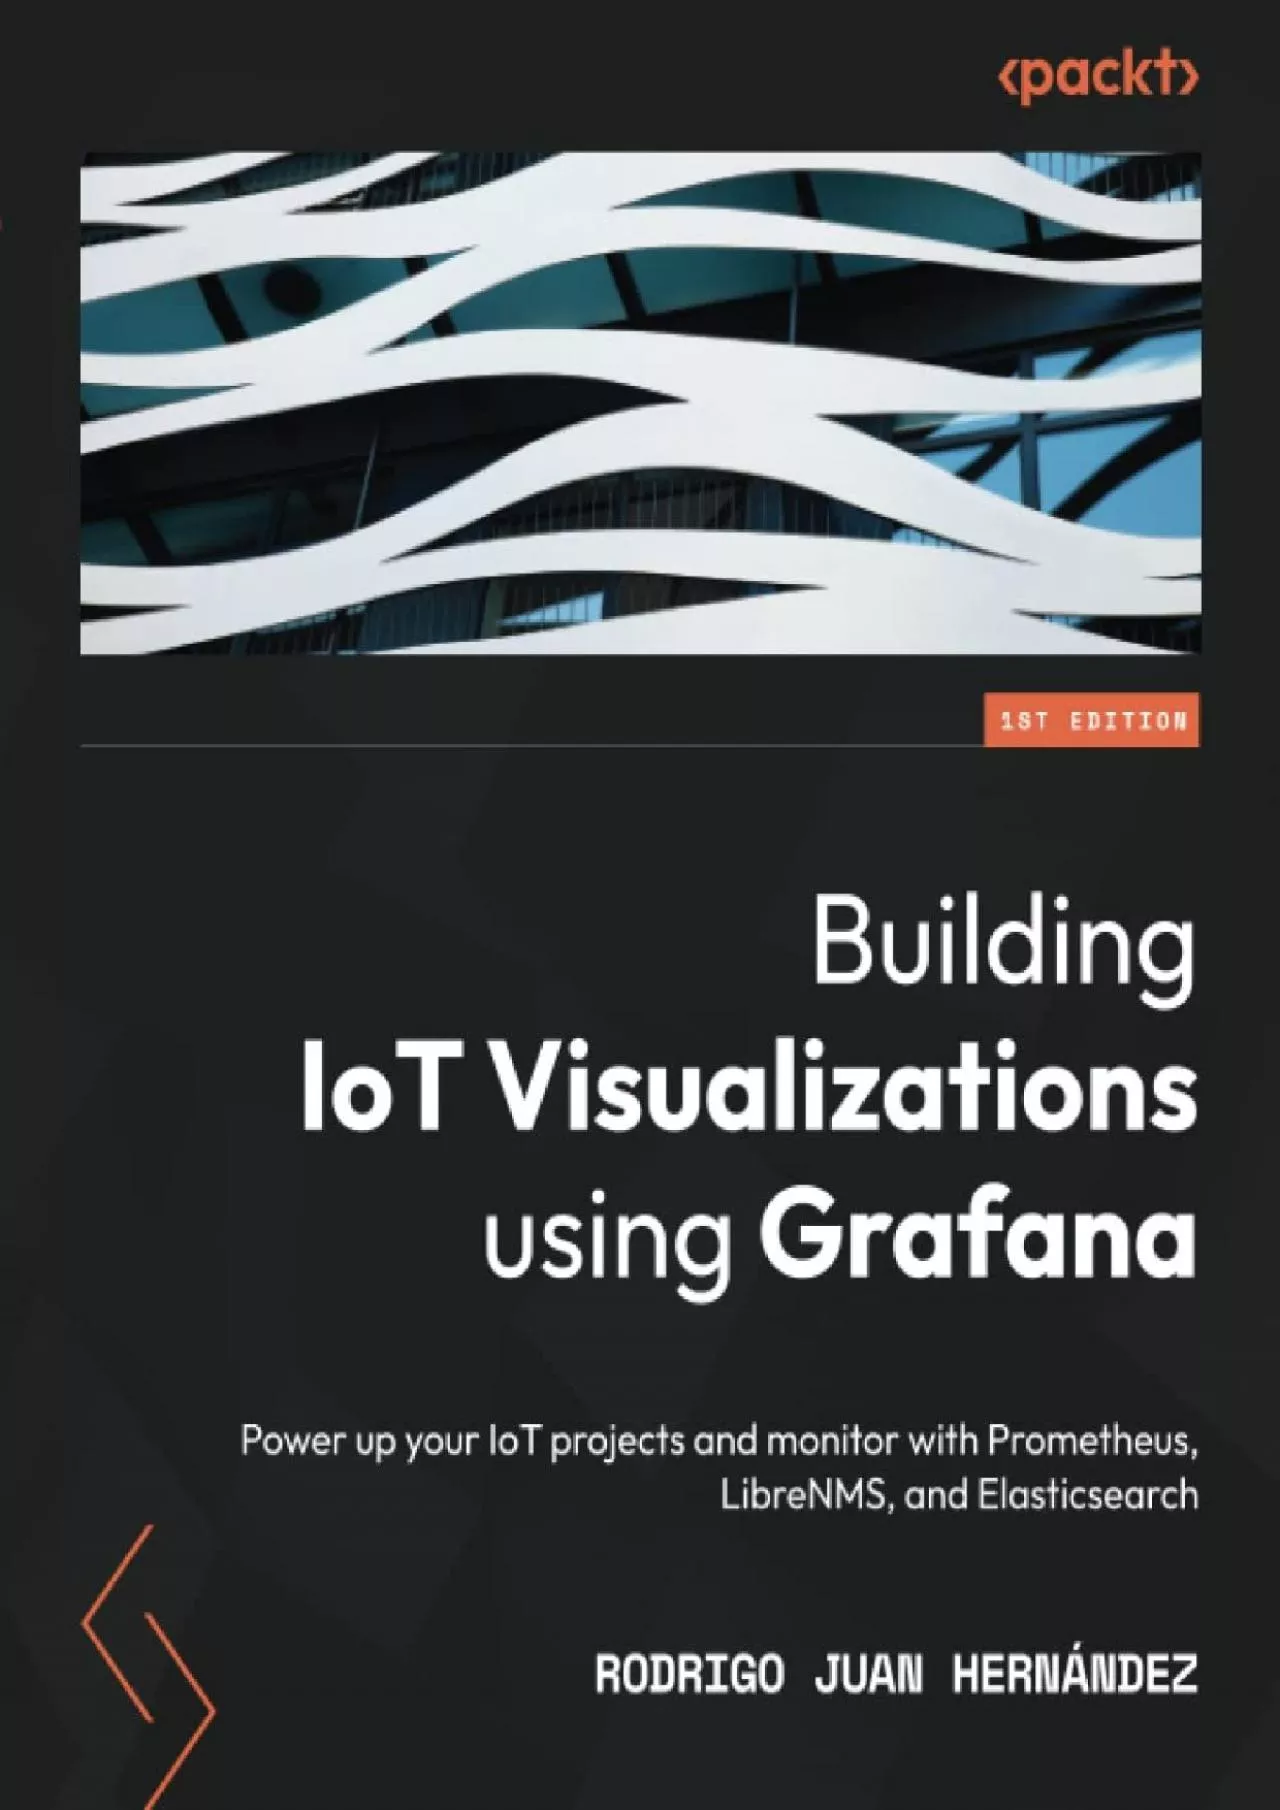 Building IoT Visualizations using Grafana: Power up your IoT projects and monitor with